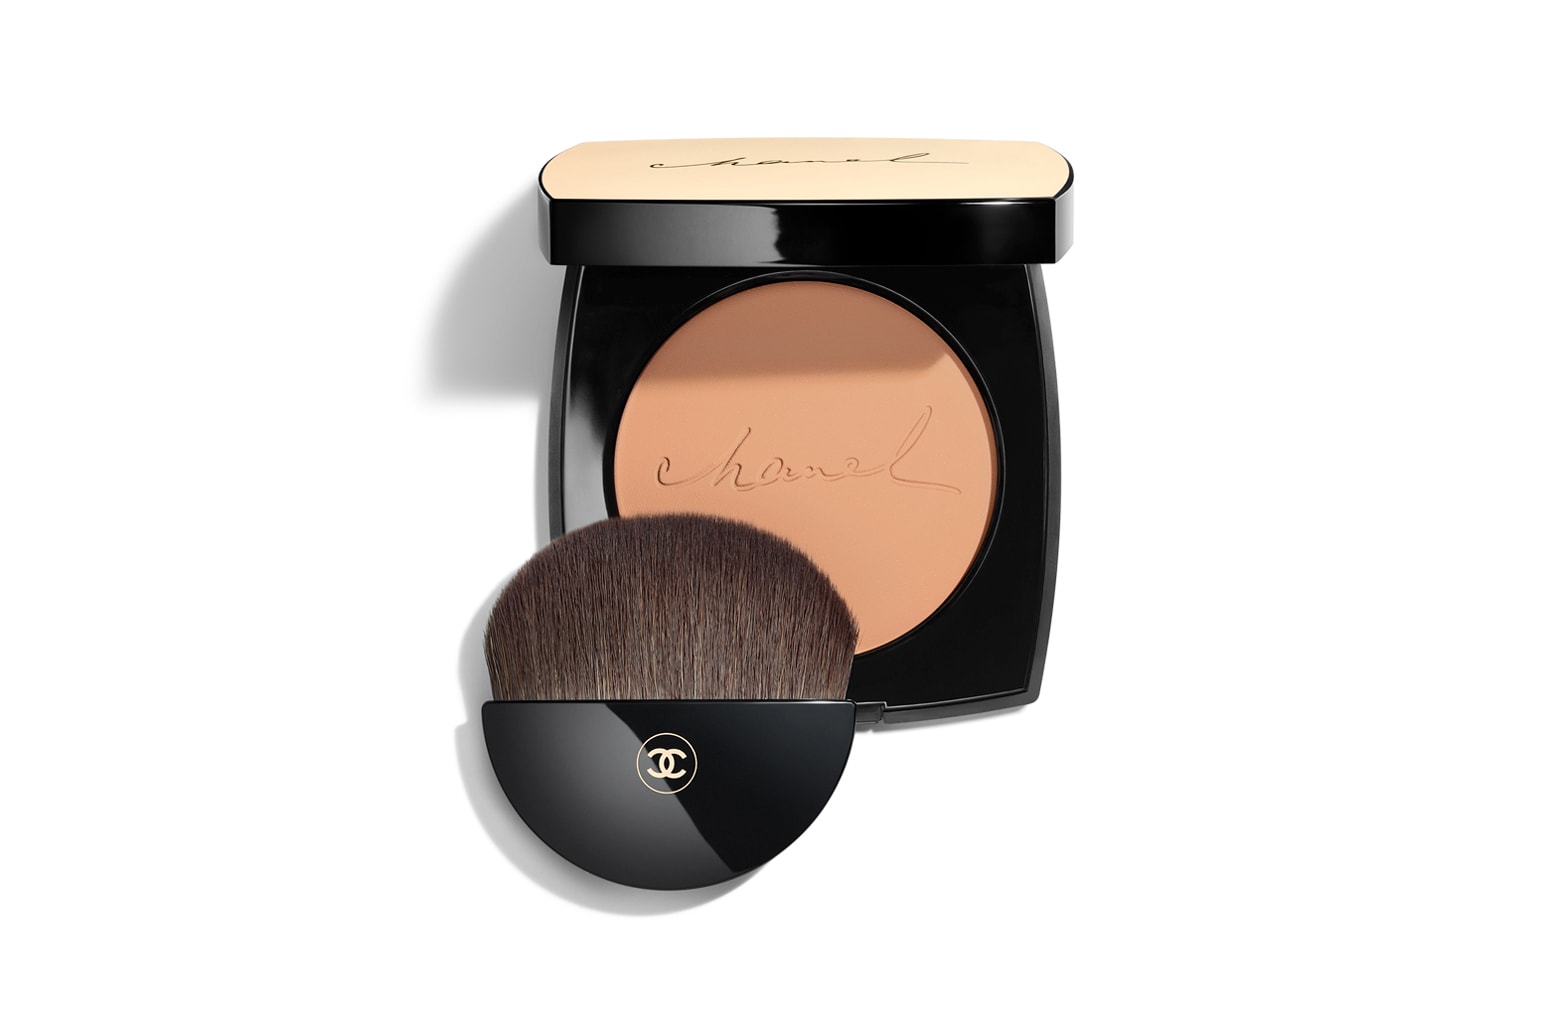 Chanel LES BEIGES 2019 Collection Sheer Powder